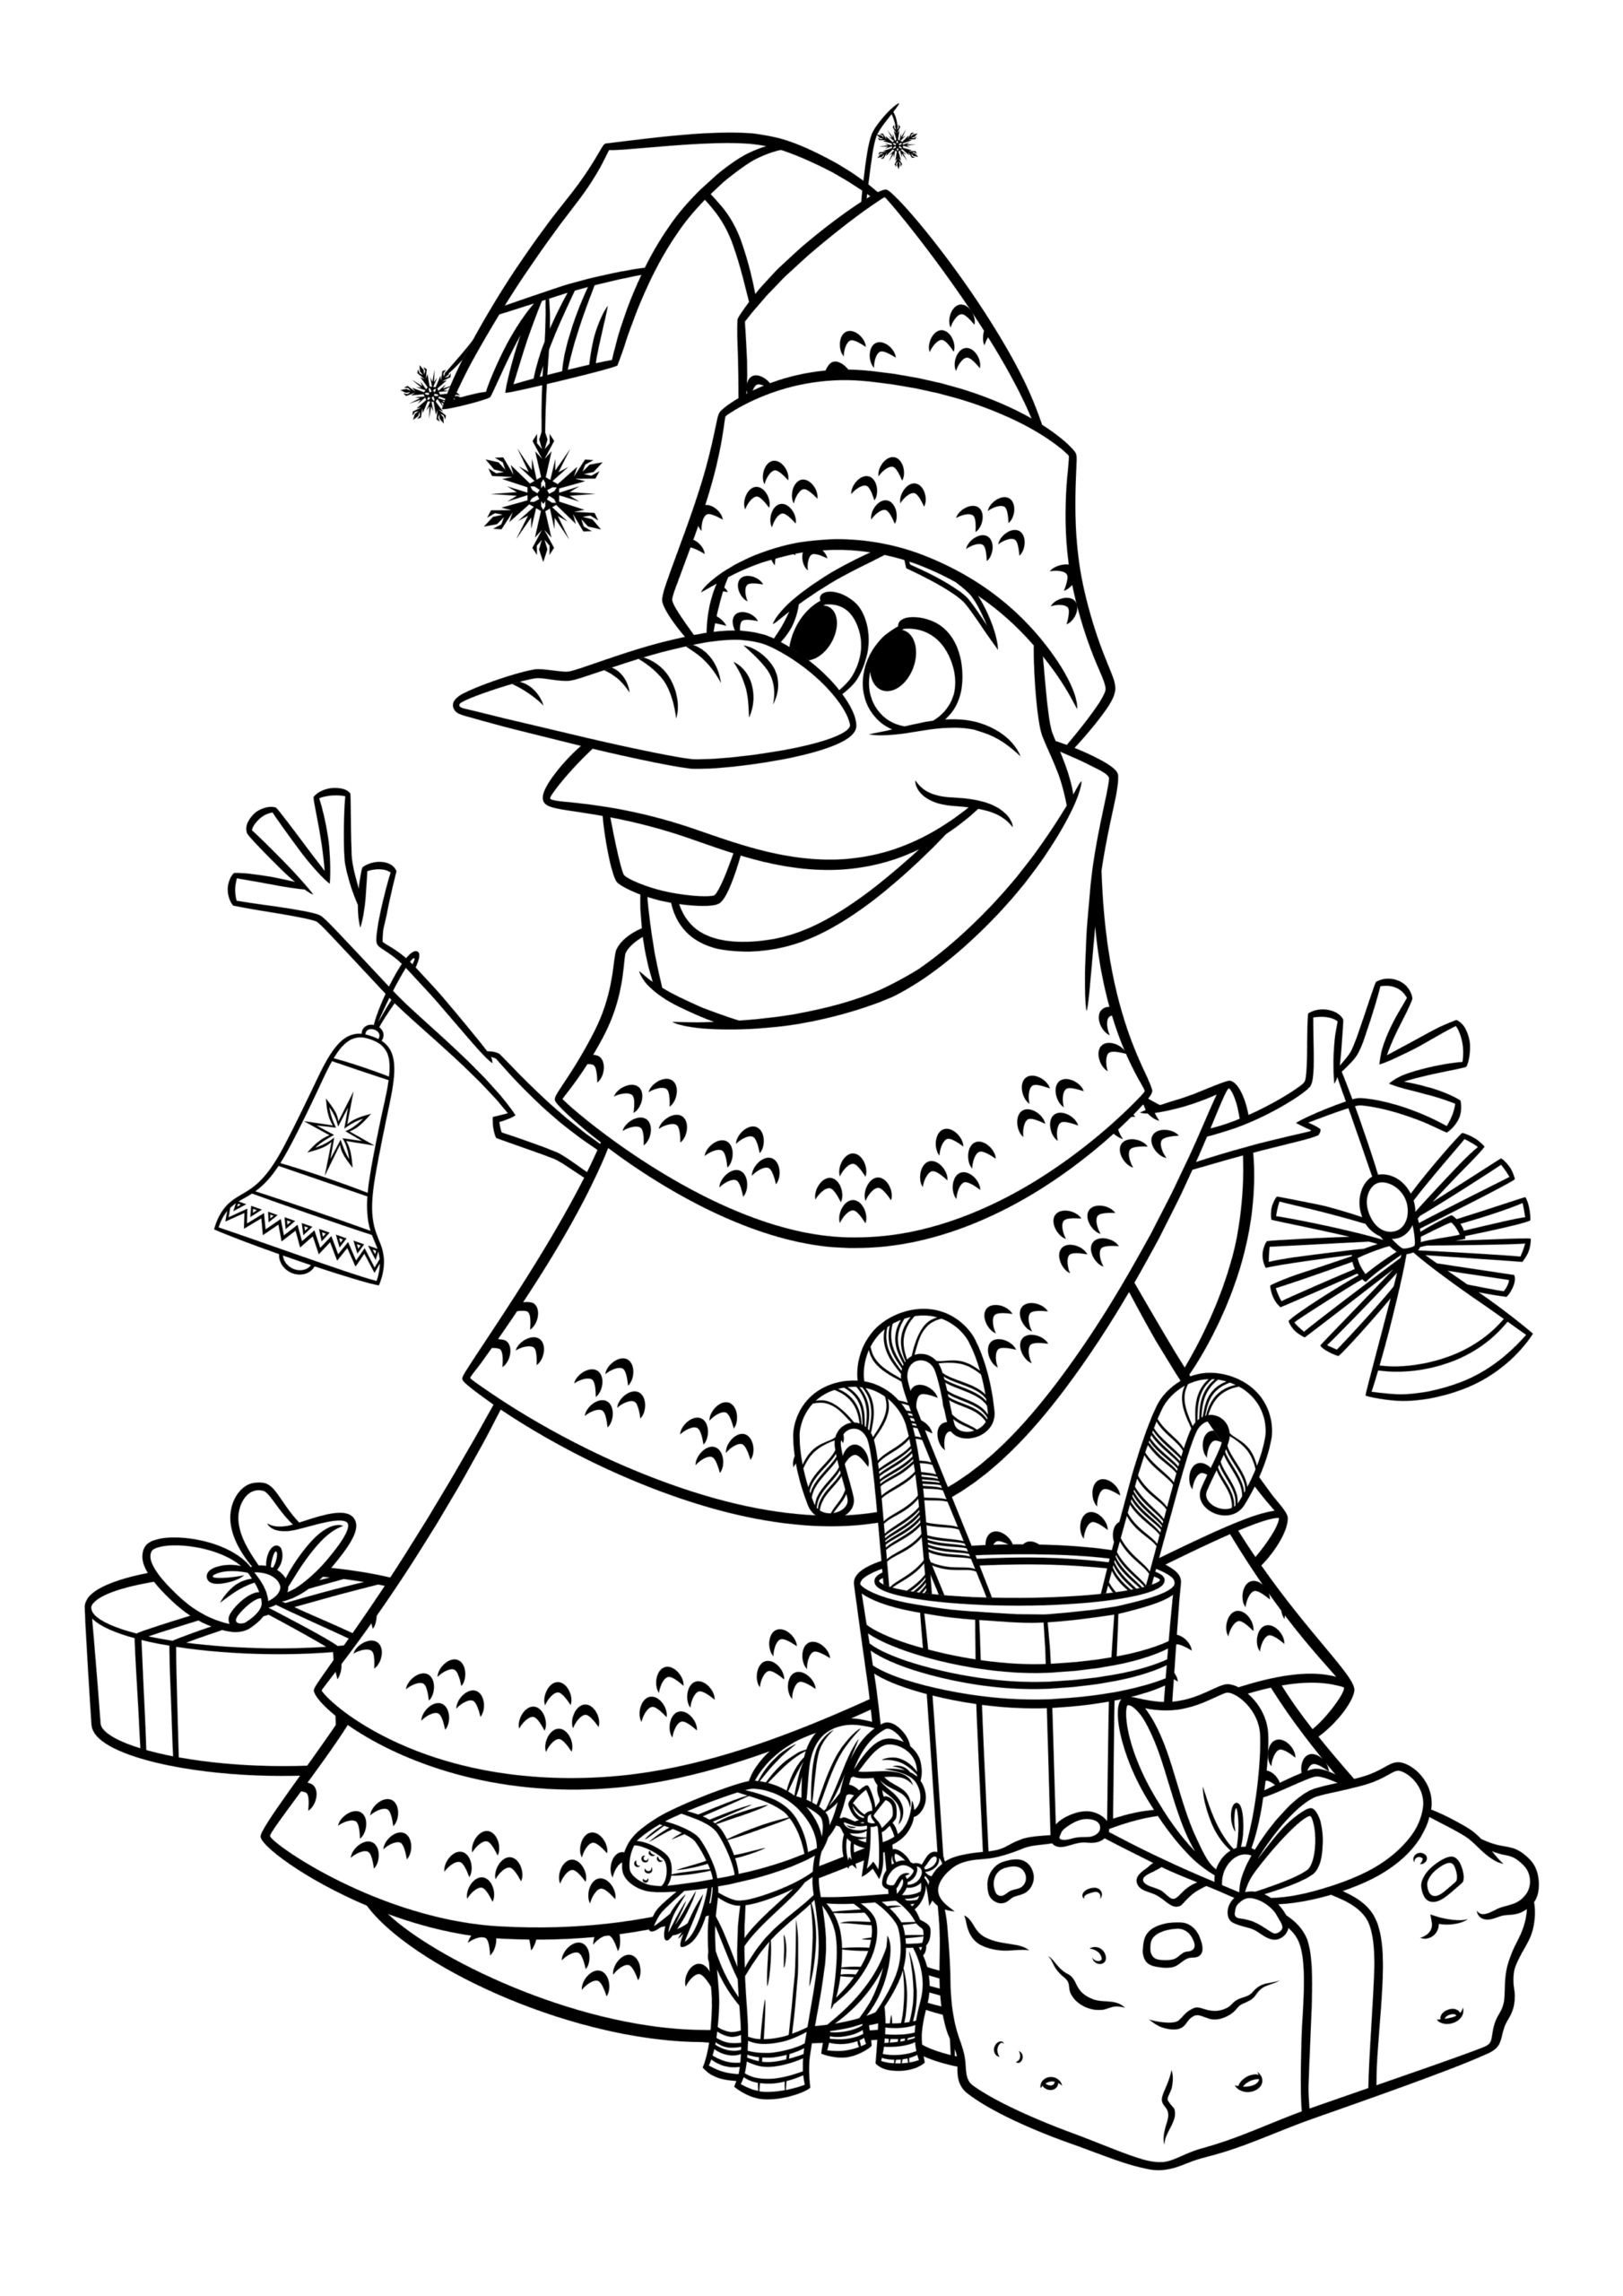 Disney Christmas Coloring Pages   Best Coloring Pages For Kids